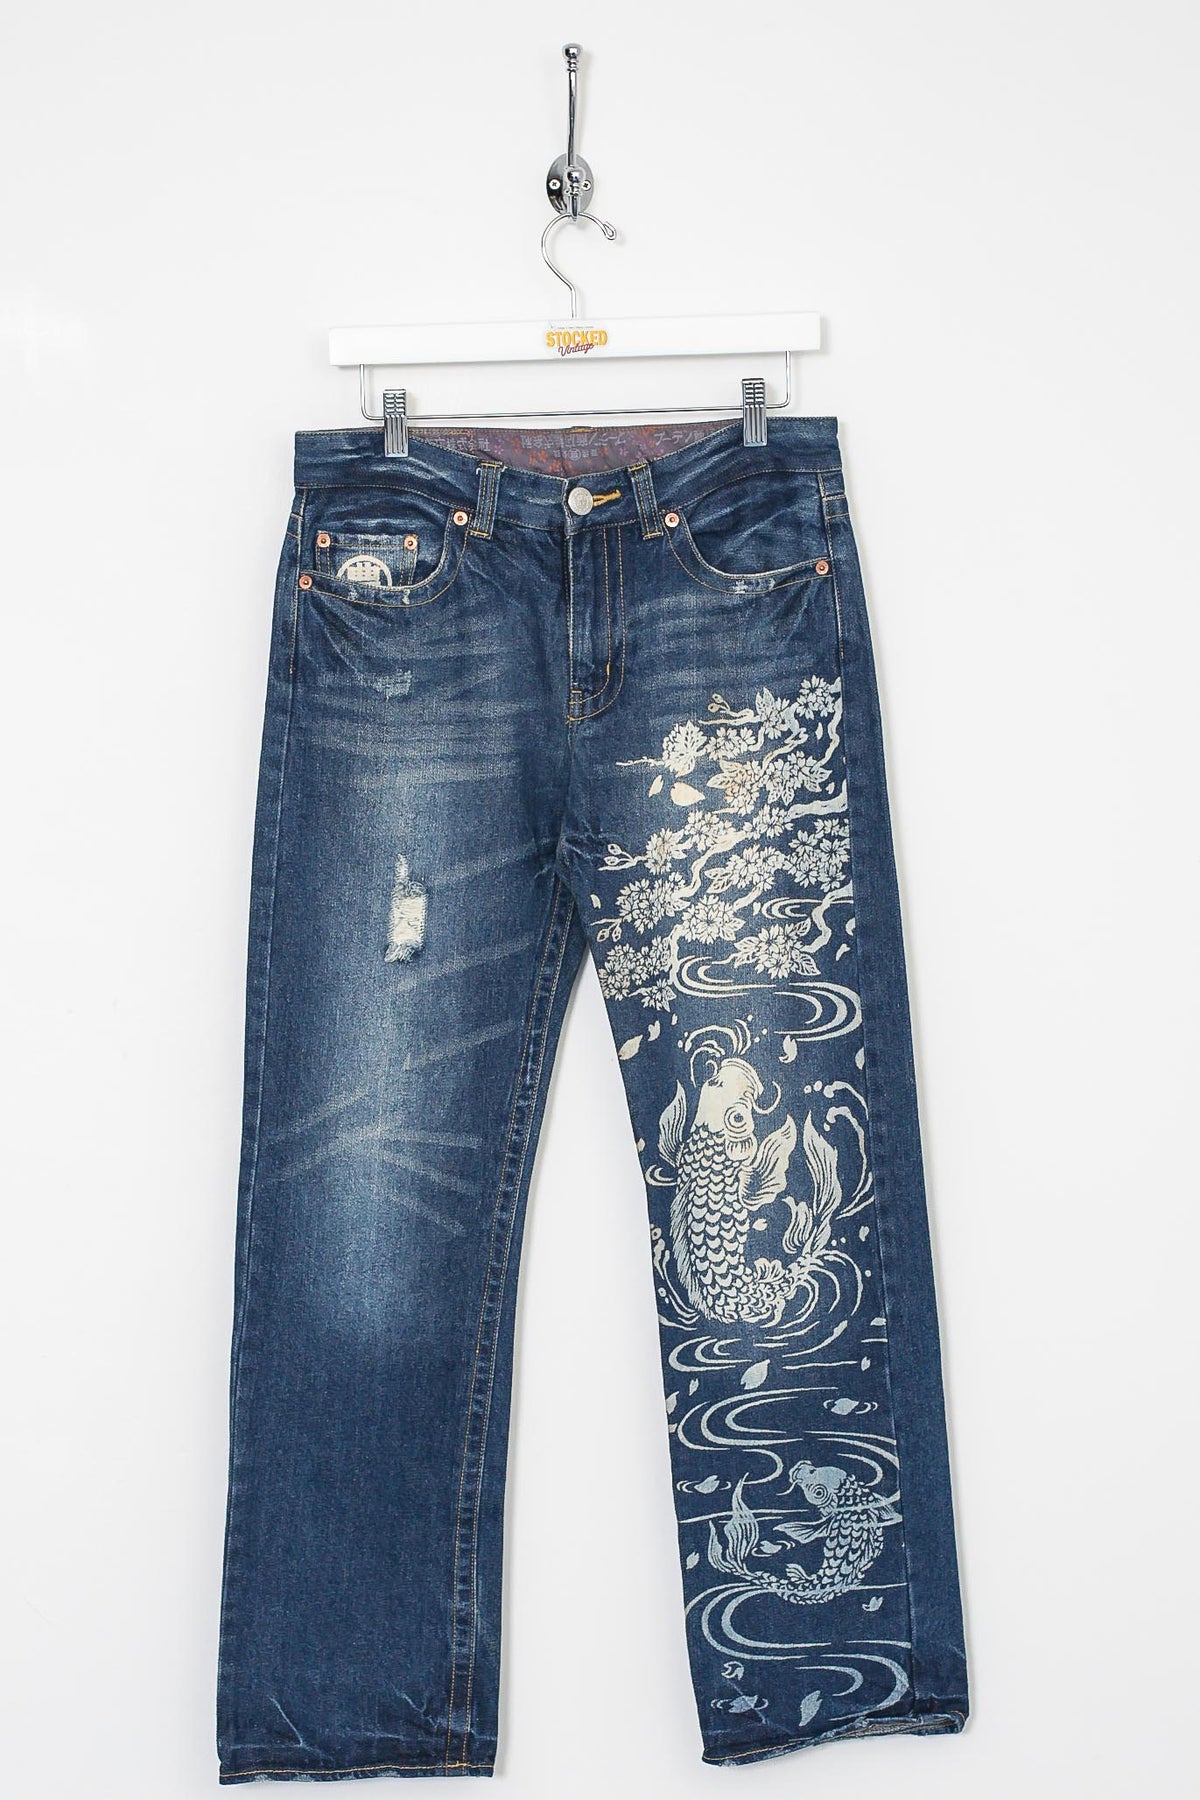 00s Japanese Tradition Jeans (M)